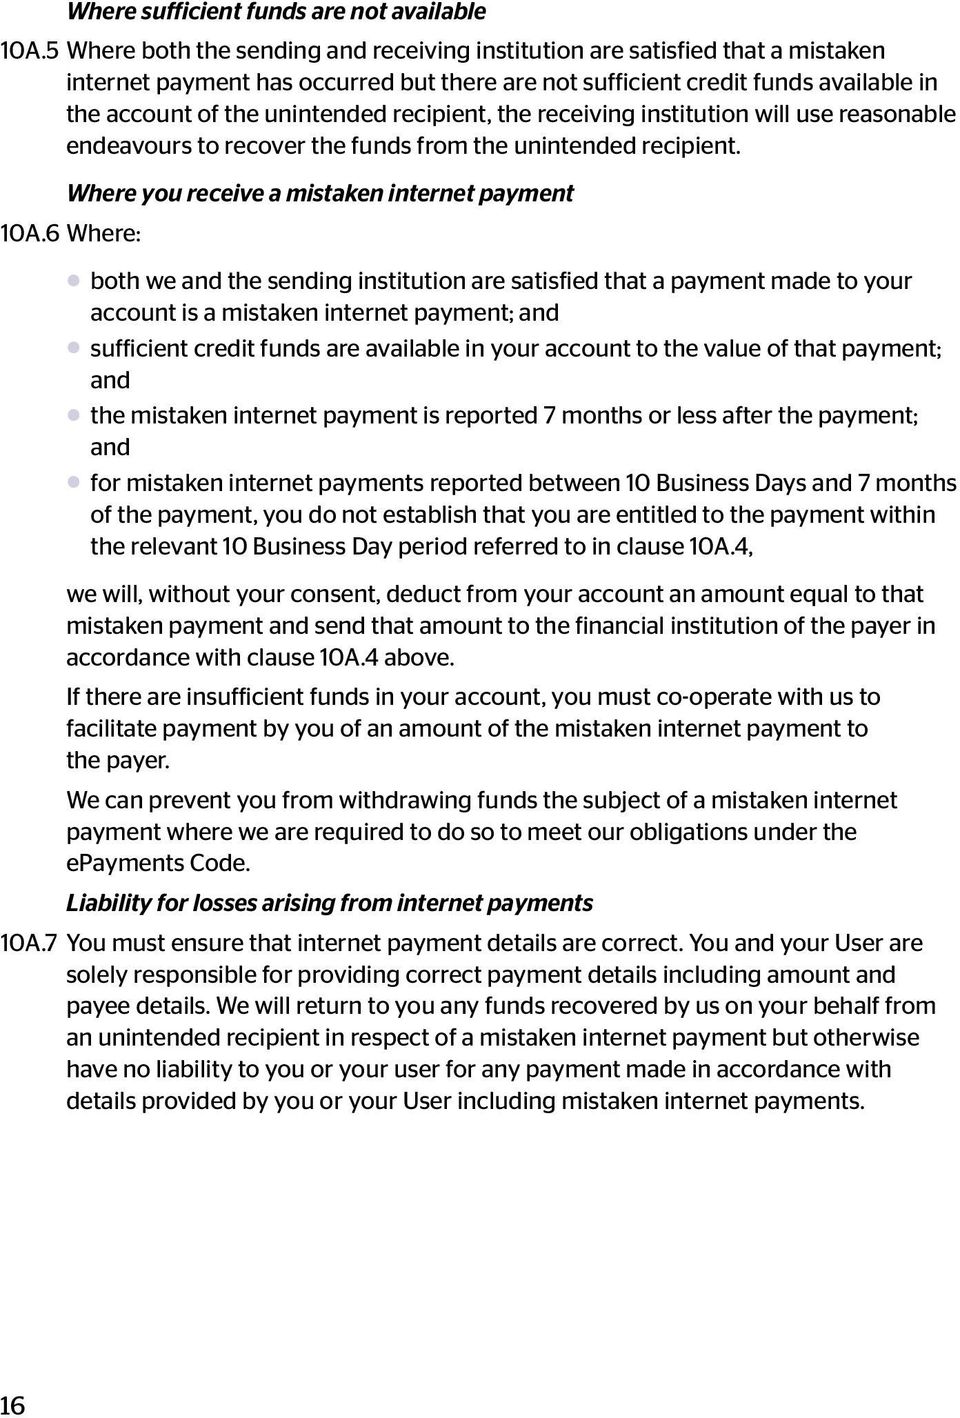 recipient, the receiving institution will use reasonable endeavours to recover the funds from the unintended recipient. Where you receive a mistaken internet payment 10A.